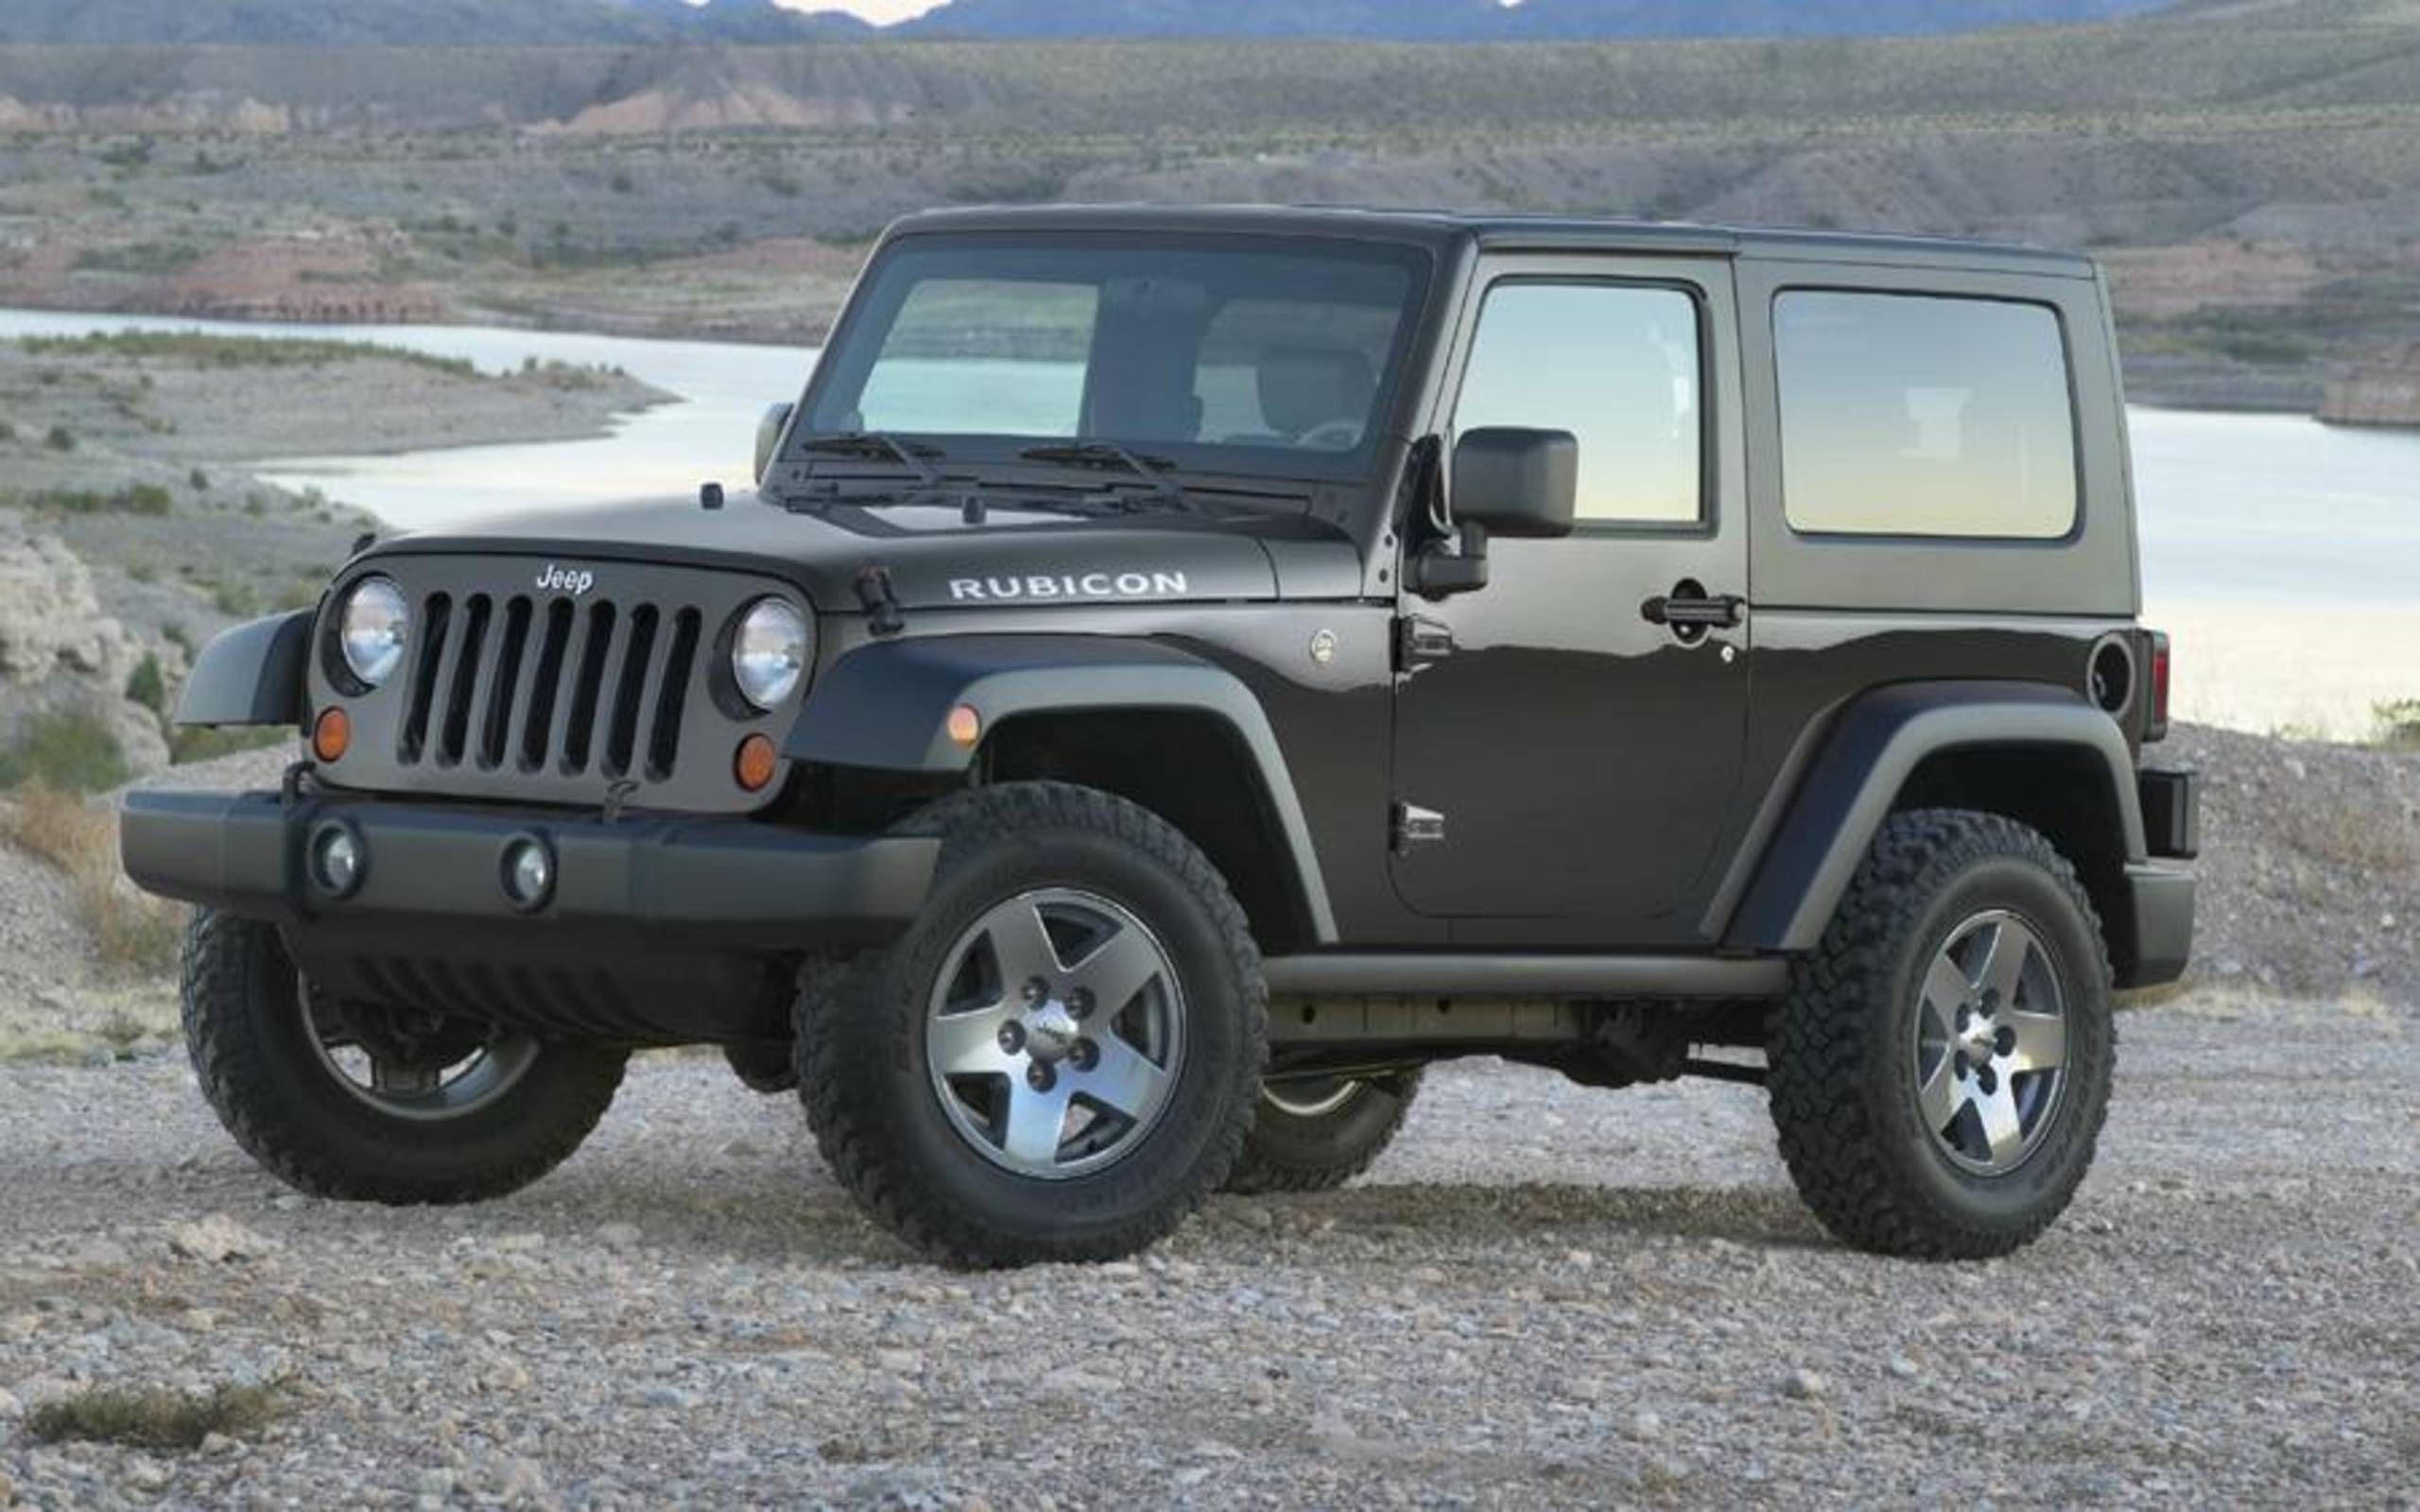 Chrysler recalls some 2010 Jeep Wranglers over fire risk